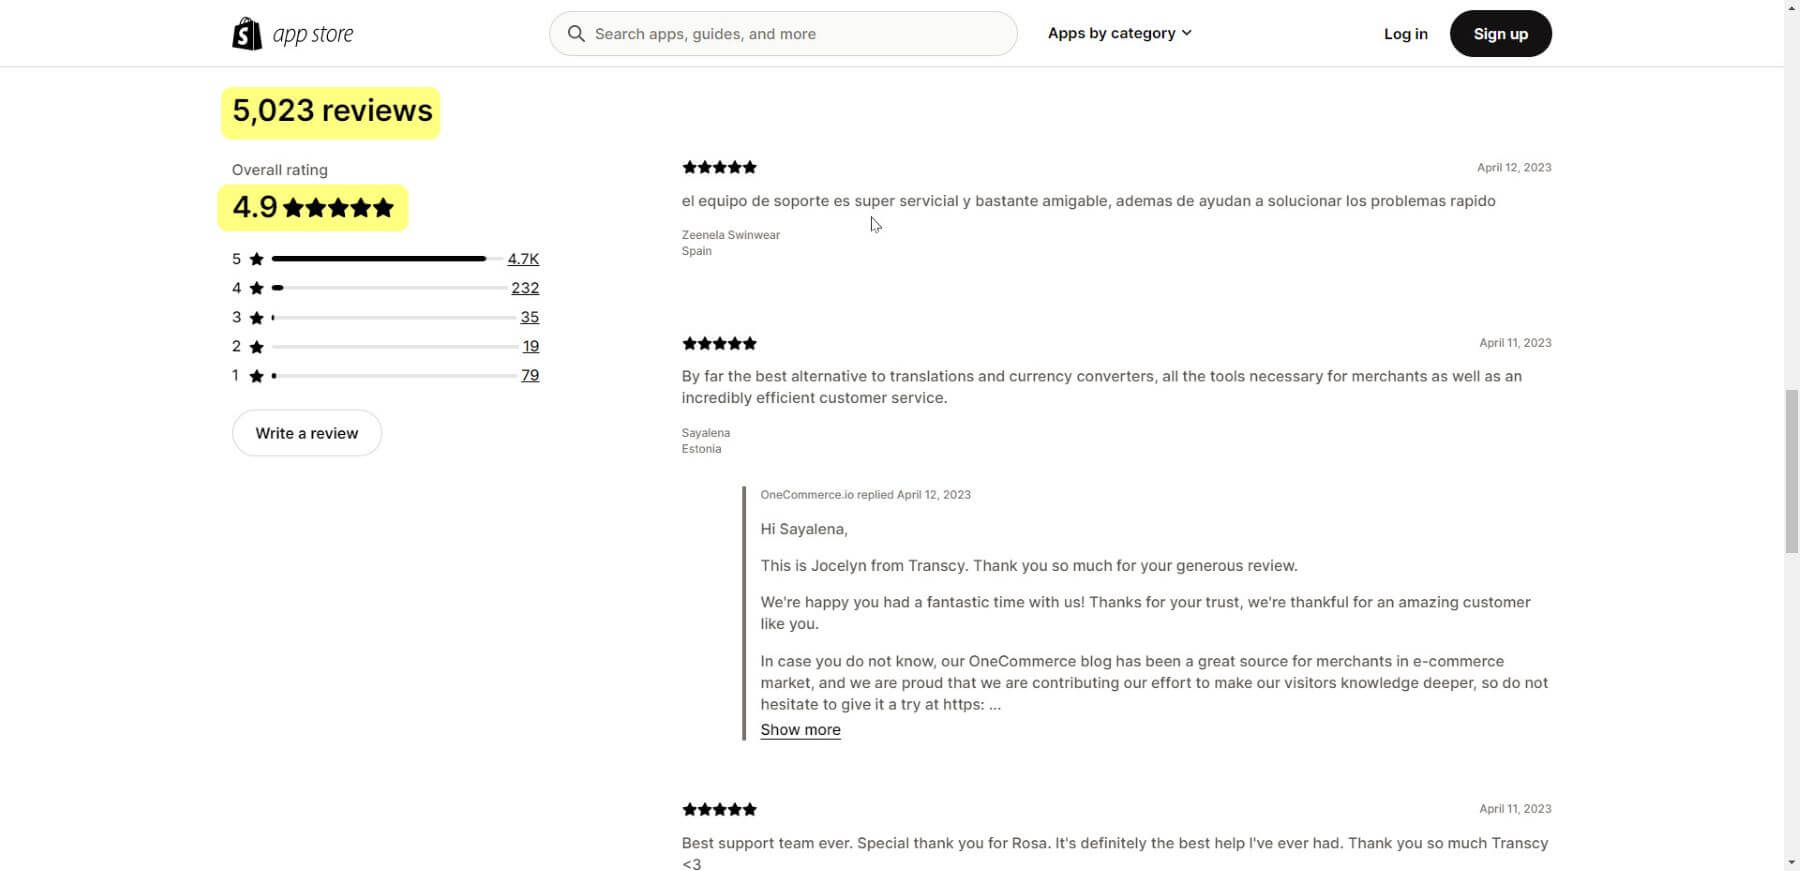 Customer reviews are an important factor to consider when choosing an app from the Shopify app store